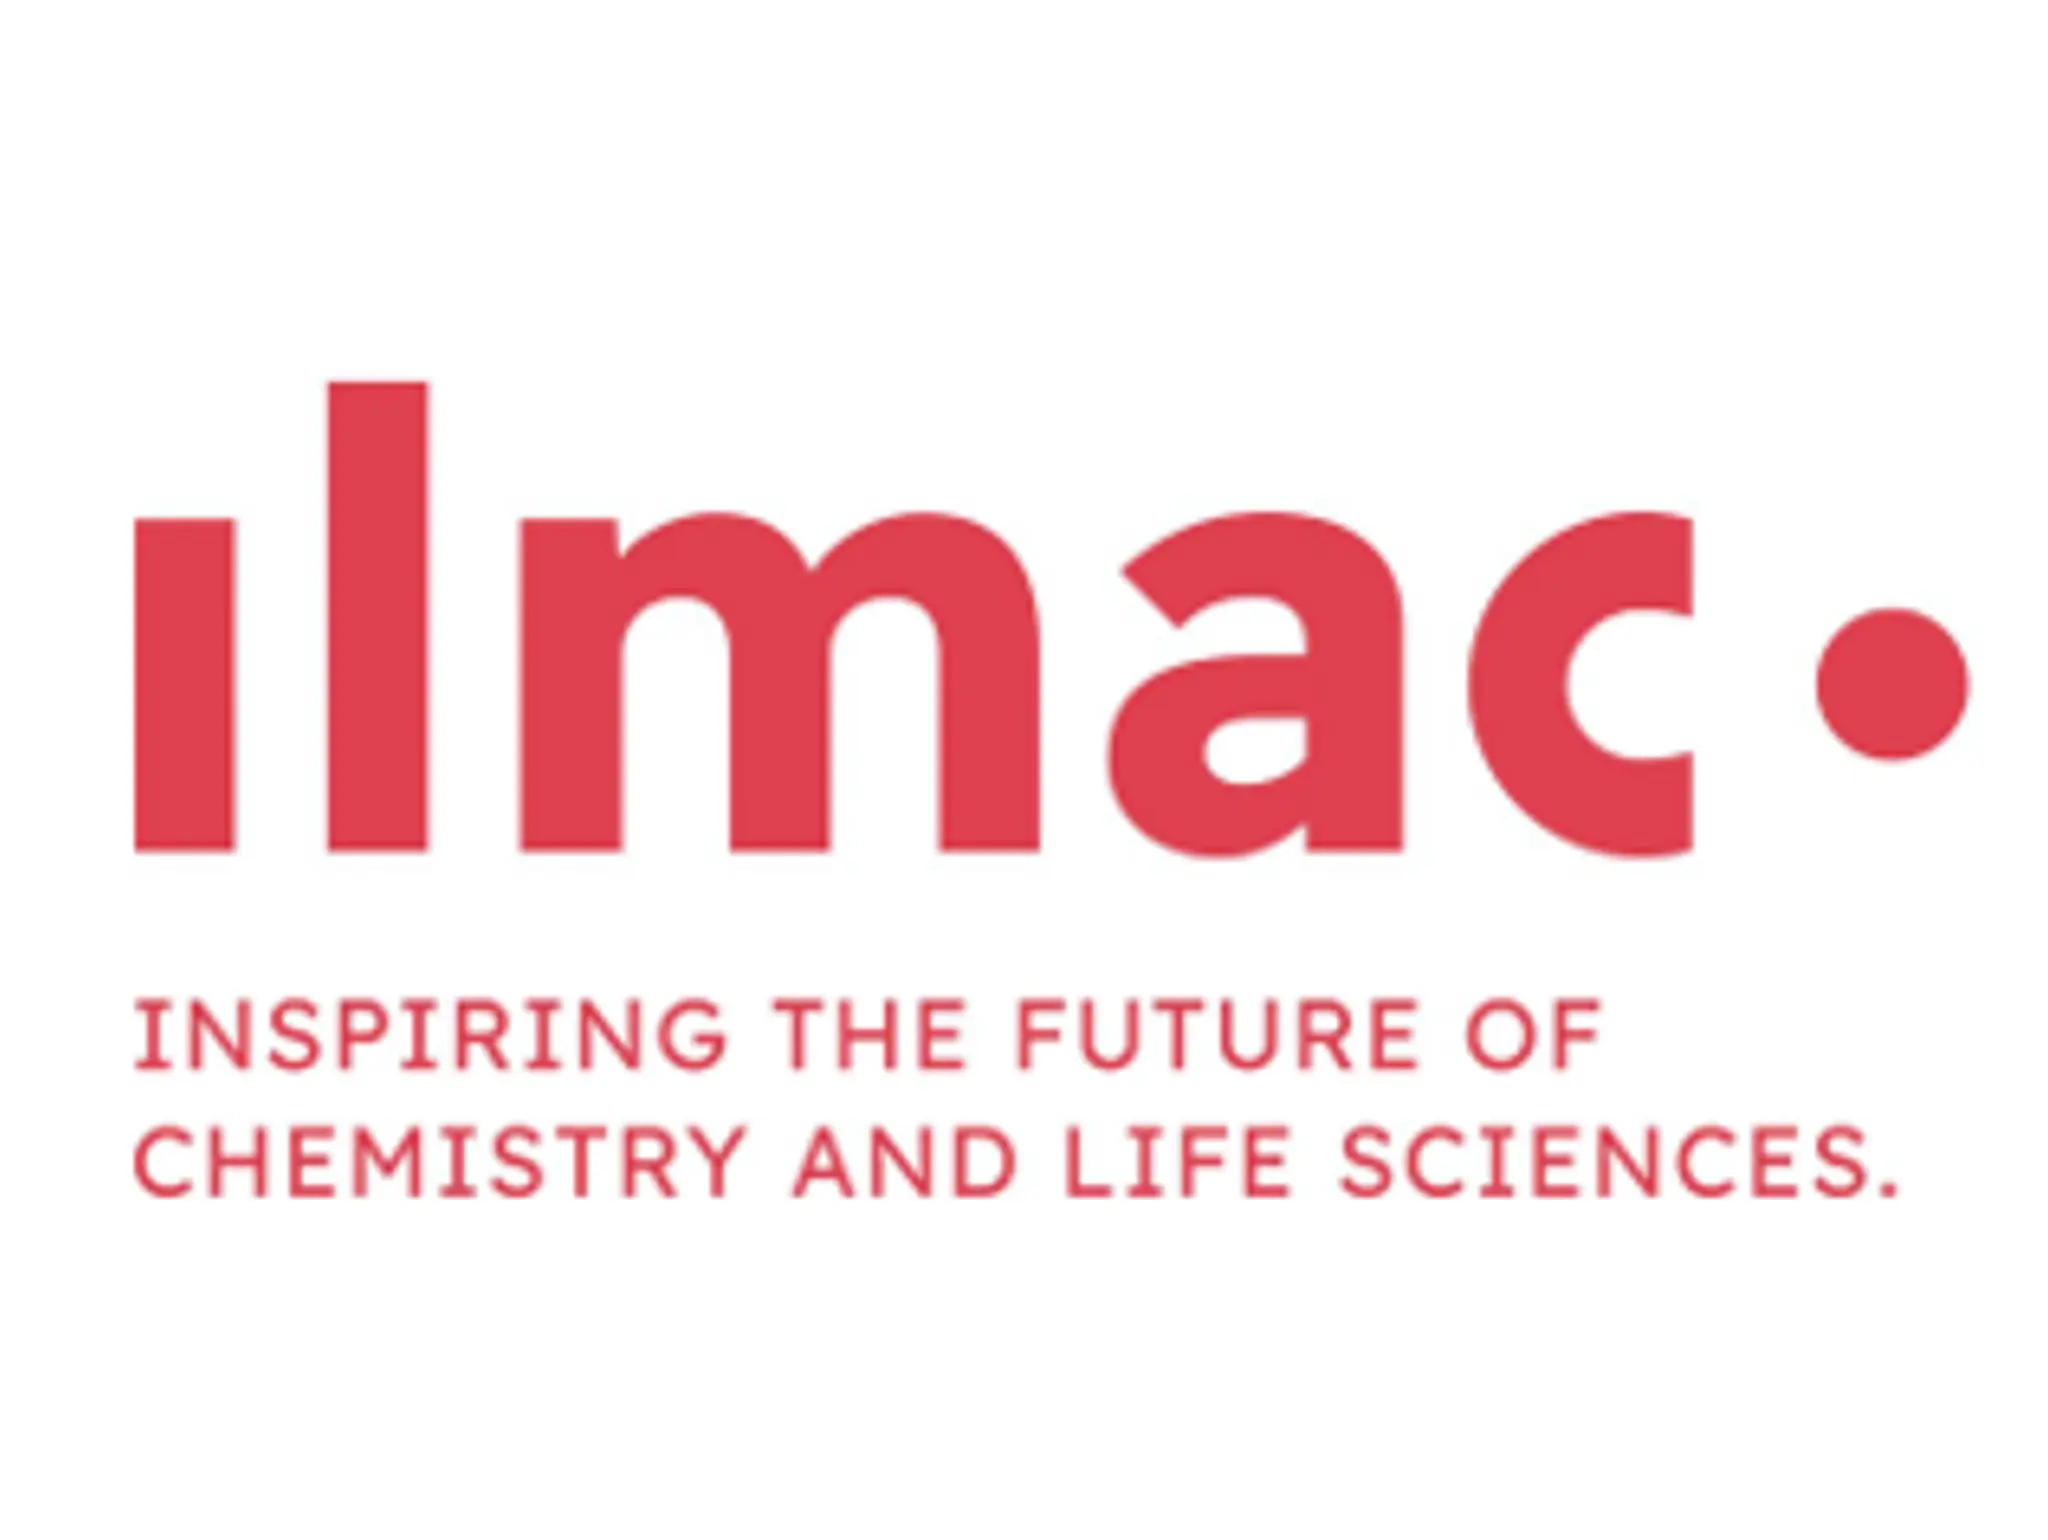 Ilmac: Inspiring the Future of Chemistry and Life Sciences